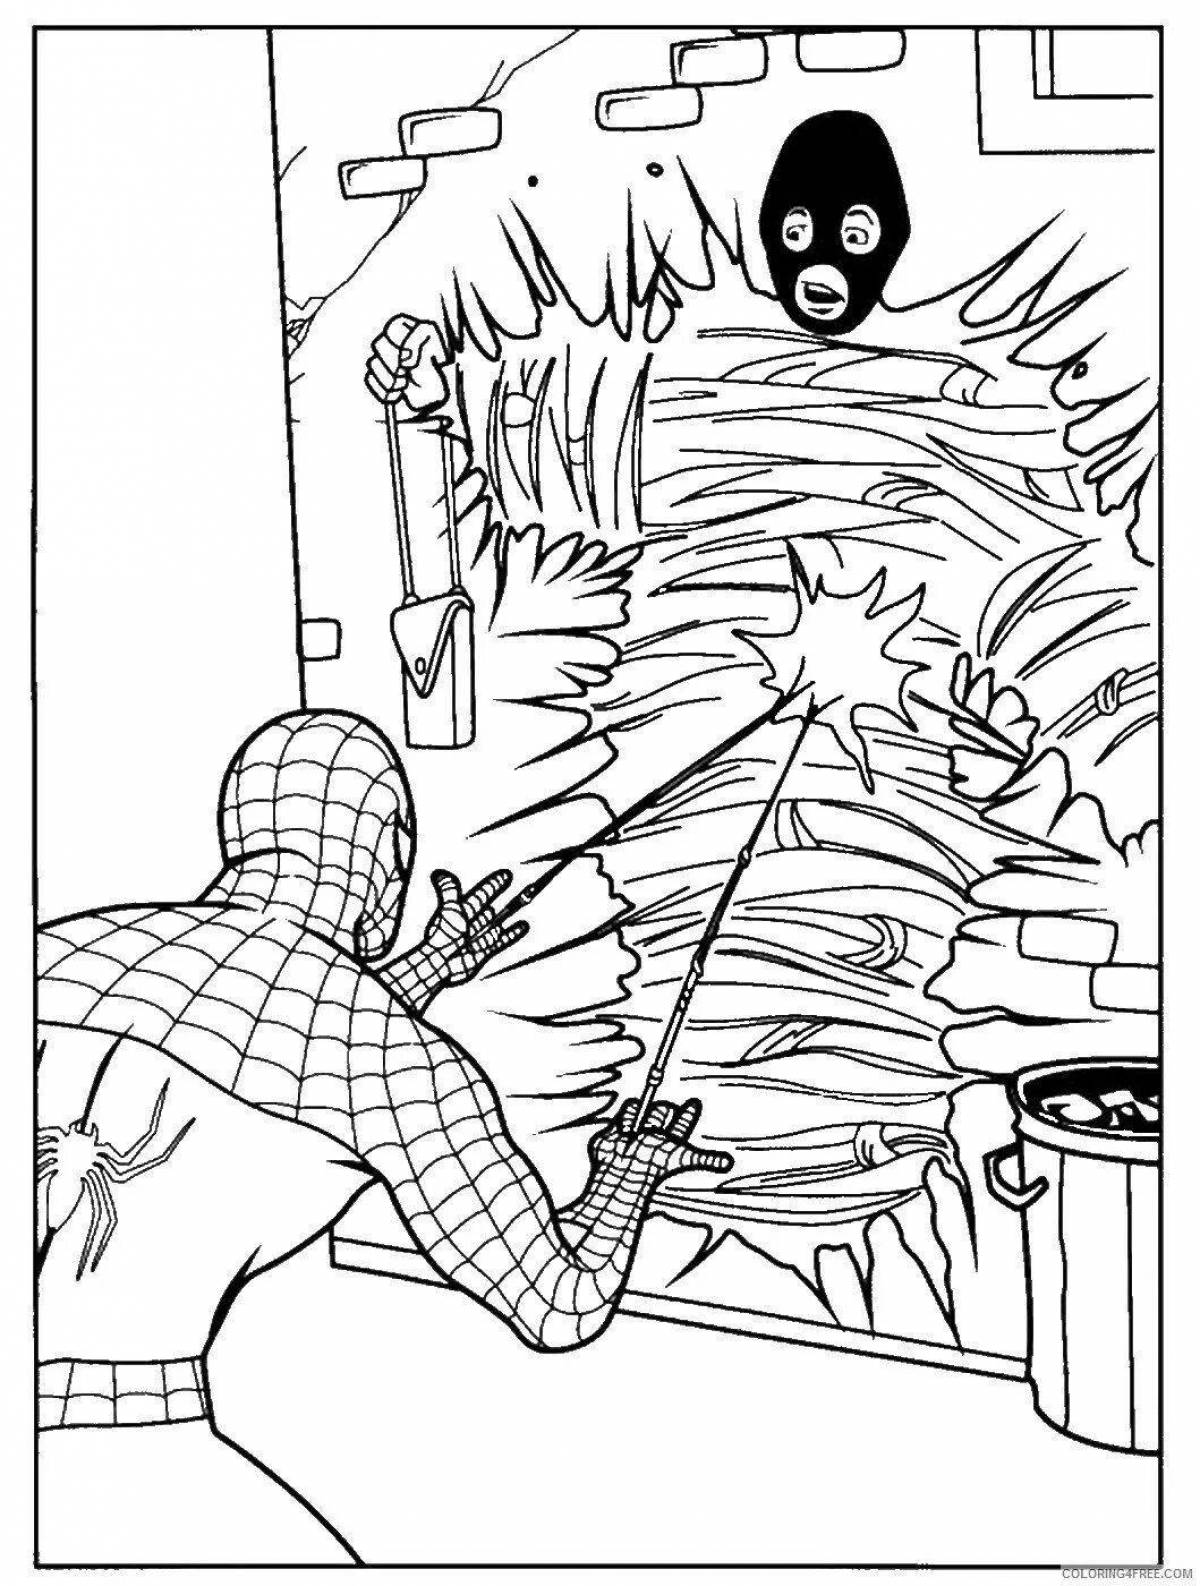 Coloring book dazzling comic spider-man